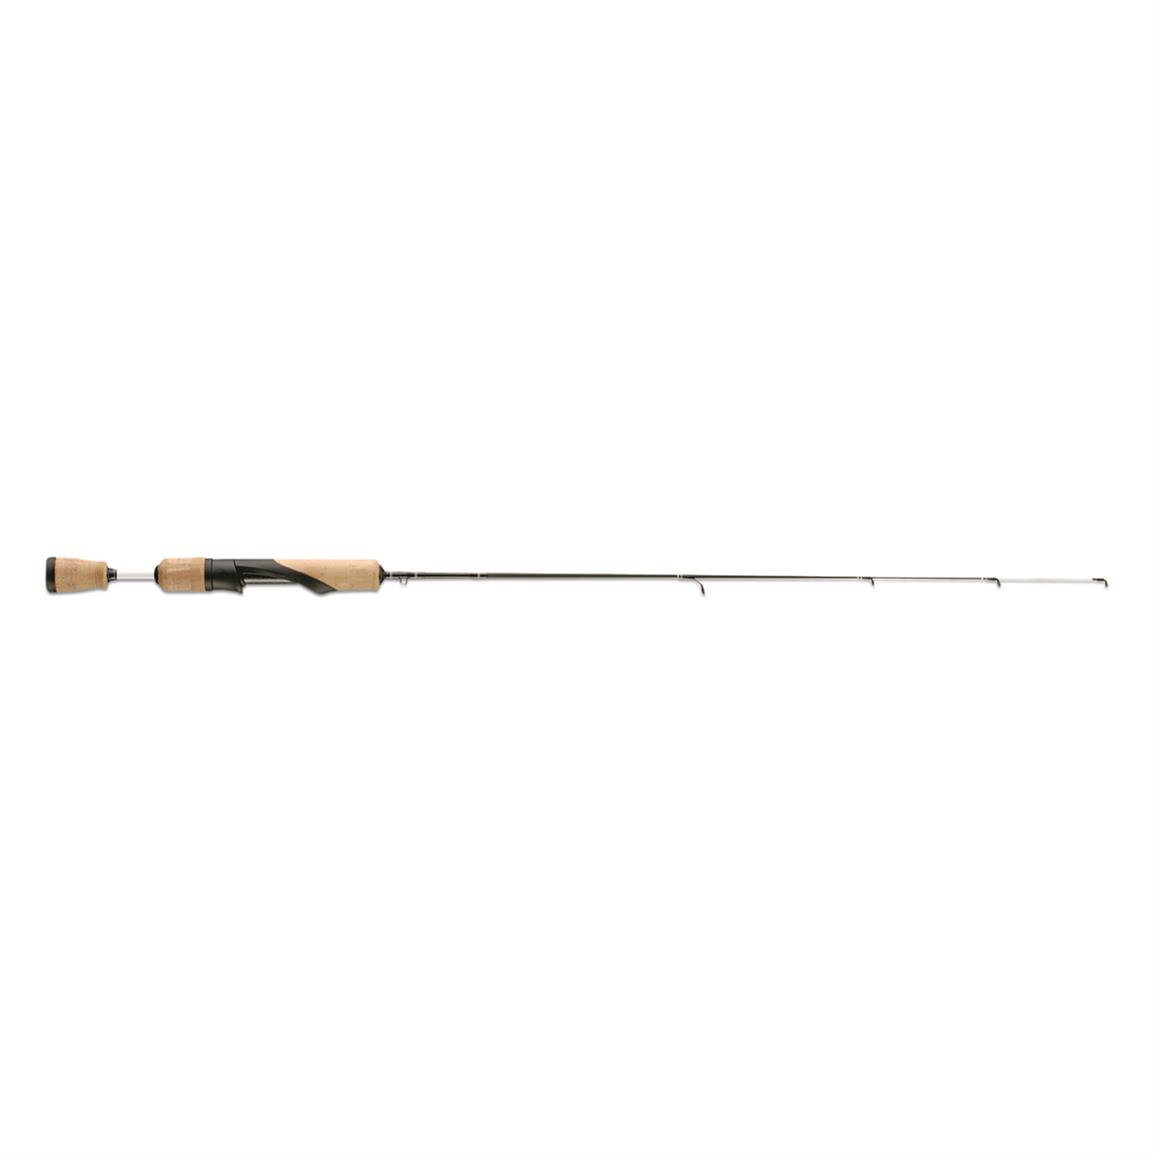 13 Fishing Tickle Stick Ice Fishing Rod, 23 Length, Super Ultra Light Power  - 728918, Ice Fishing Rods at Sportsman's Guide